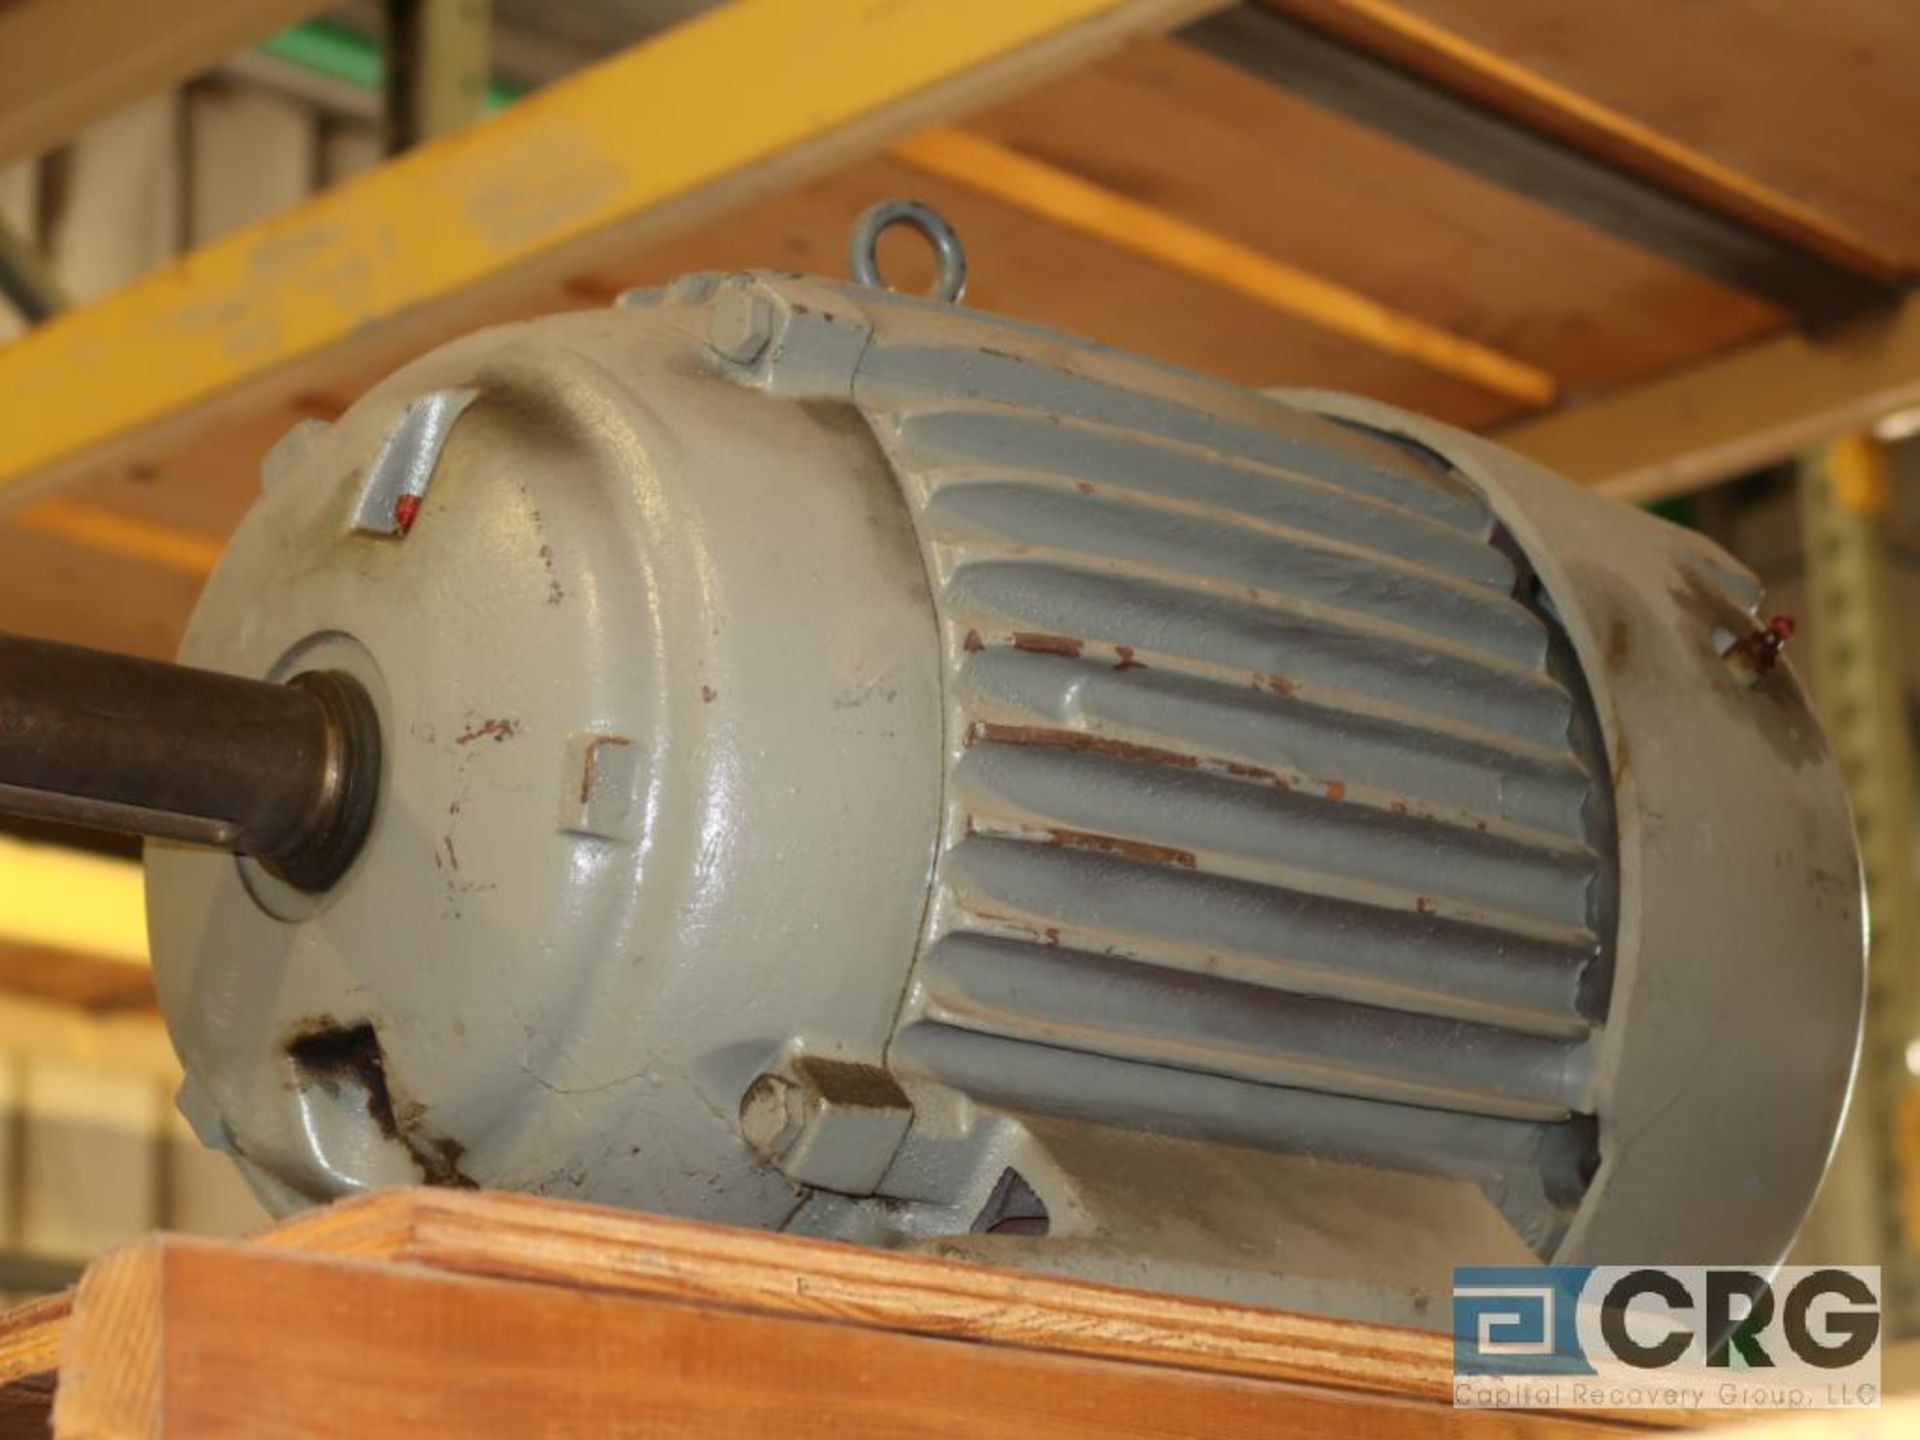 Lot of (32) assorted 15 HP, 10 HP, and 7.5 HP motors on (7) shelves, some with gear drives (Motor - Image 8 of 8